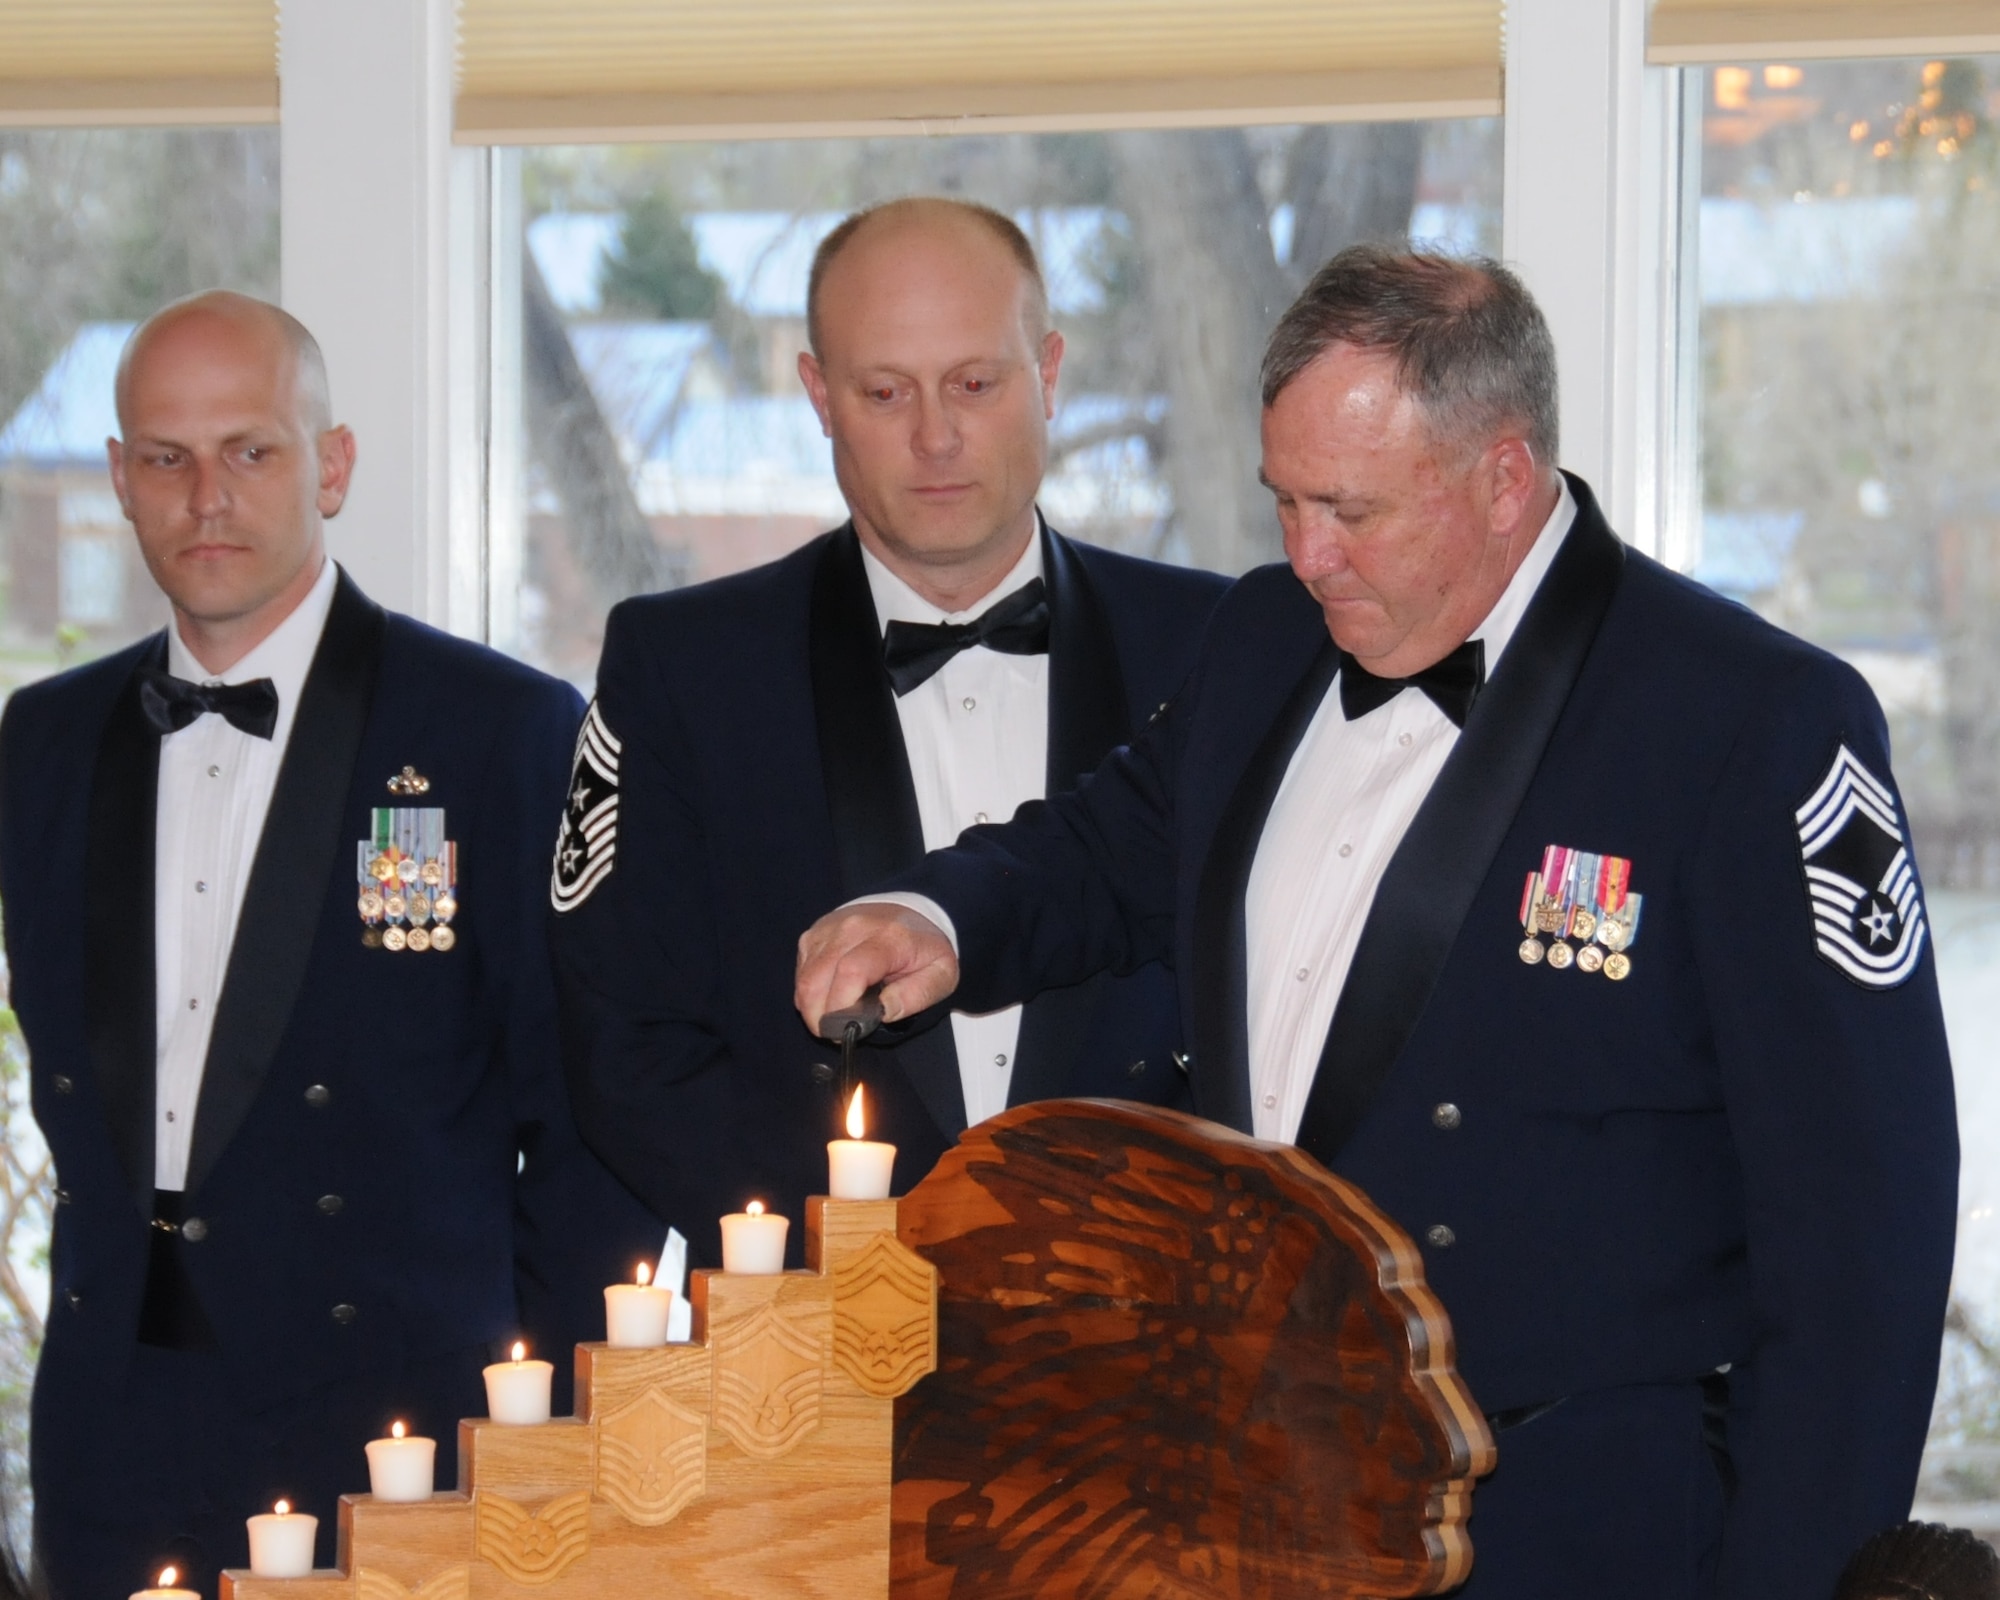 Chief Master Sgt. Randy Remsen, 120th Airlift Wing, lights the candle representing the Chief Master Sgt. rank during the chief’s induction ceremony May 2 at the Meadow Lark Country Club in Great Falls, Montana. (National Guard photo/Staff Sgt. Michael Touchette)